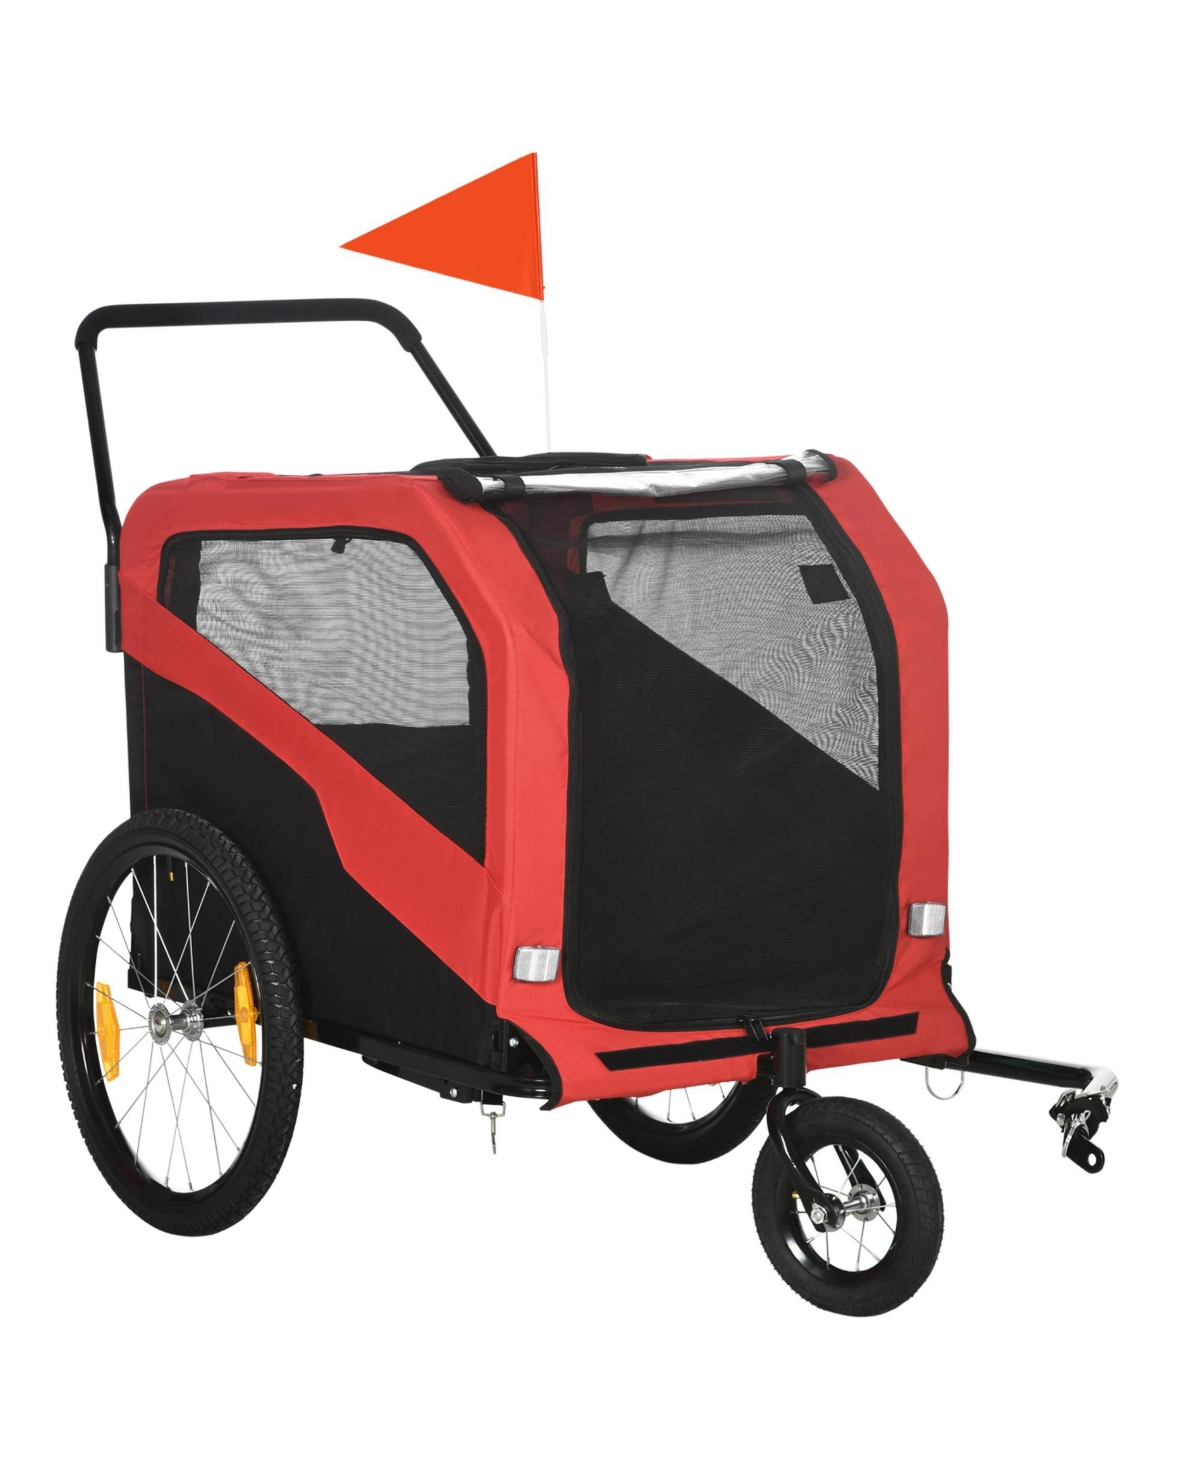 2-in-1 Dog Bike Trailer Pet Stroller Carrier for Large Dogs with Hitch - Red